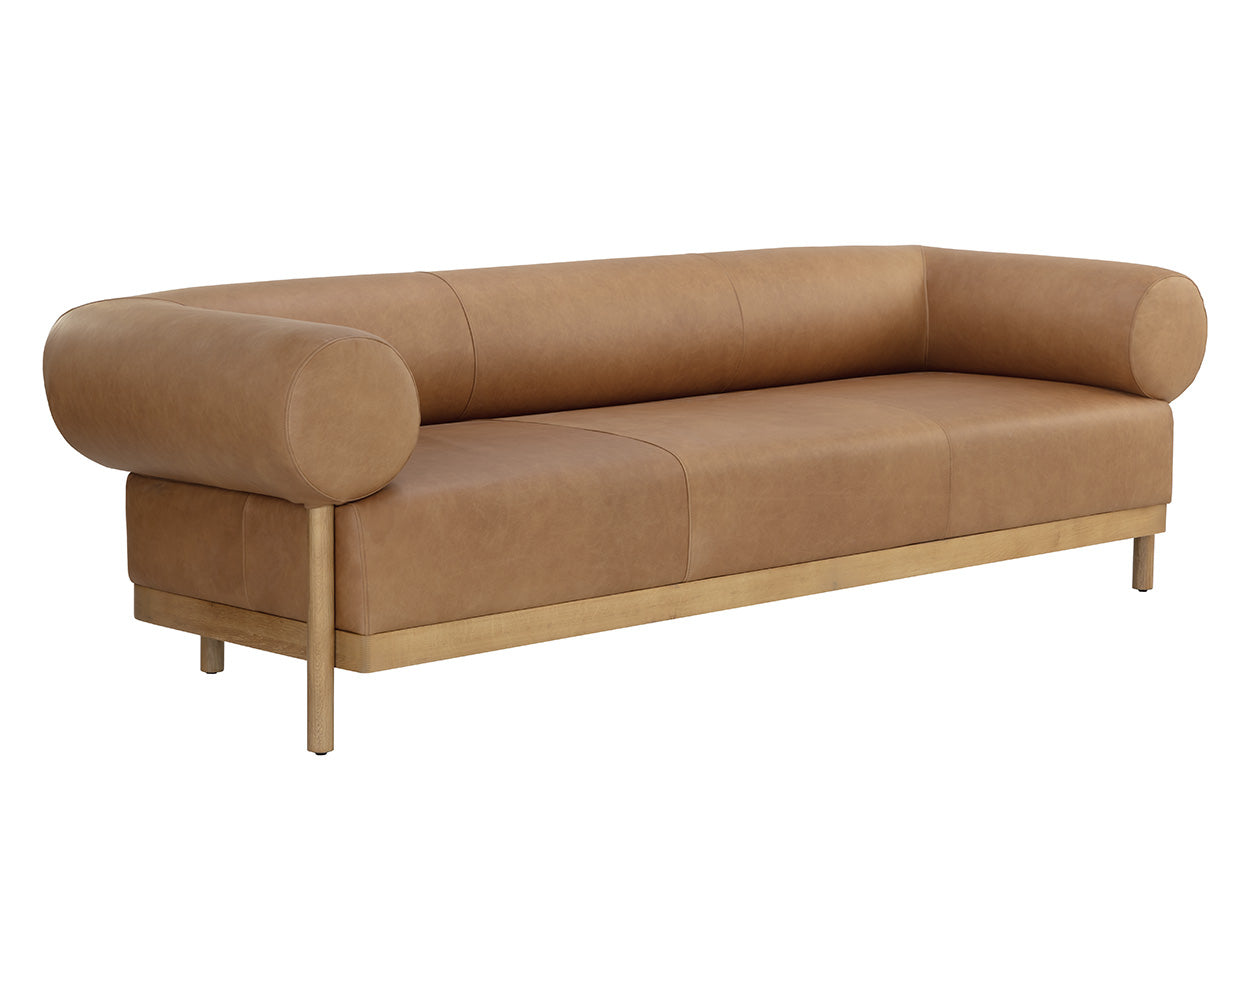 Picture of Bromley Sofa - Rustic Oak